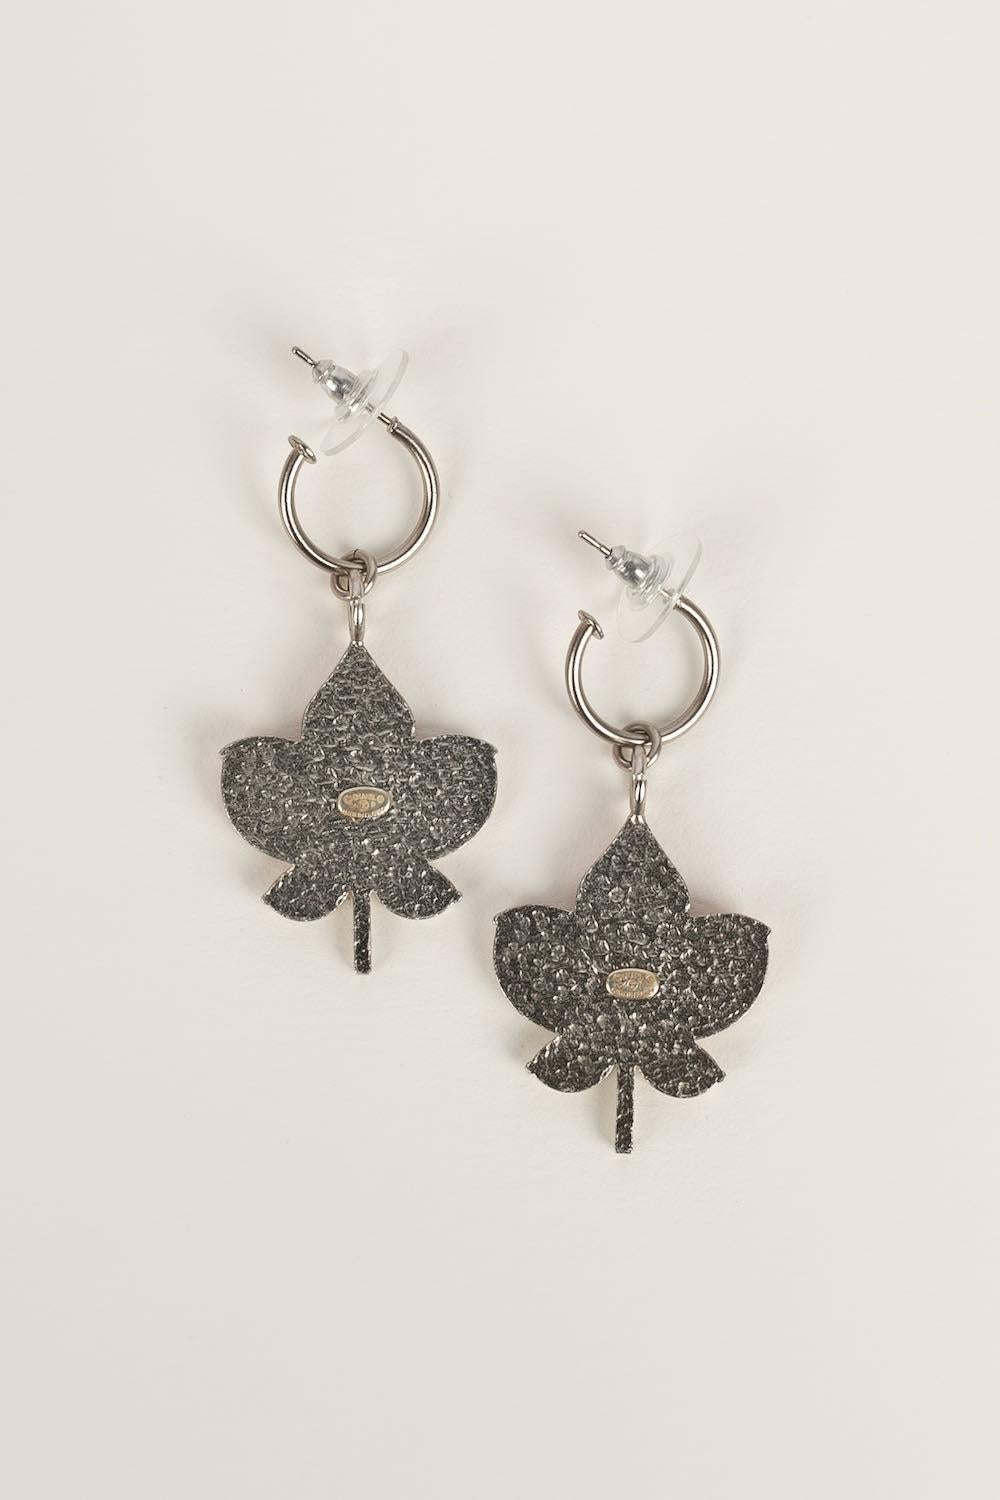 Chanel - (Made in France) Earrings in silver plated metal enamelled. Collection 2004.

Additional information:
Dimensions: 5 L cm
Condition: Very good condition
Seller Ref number: BOB89